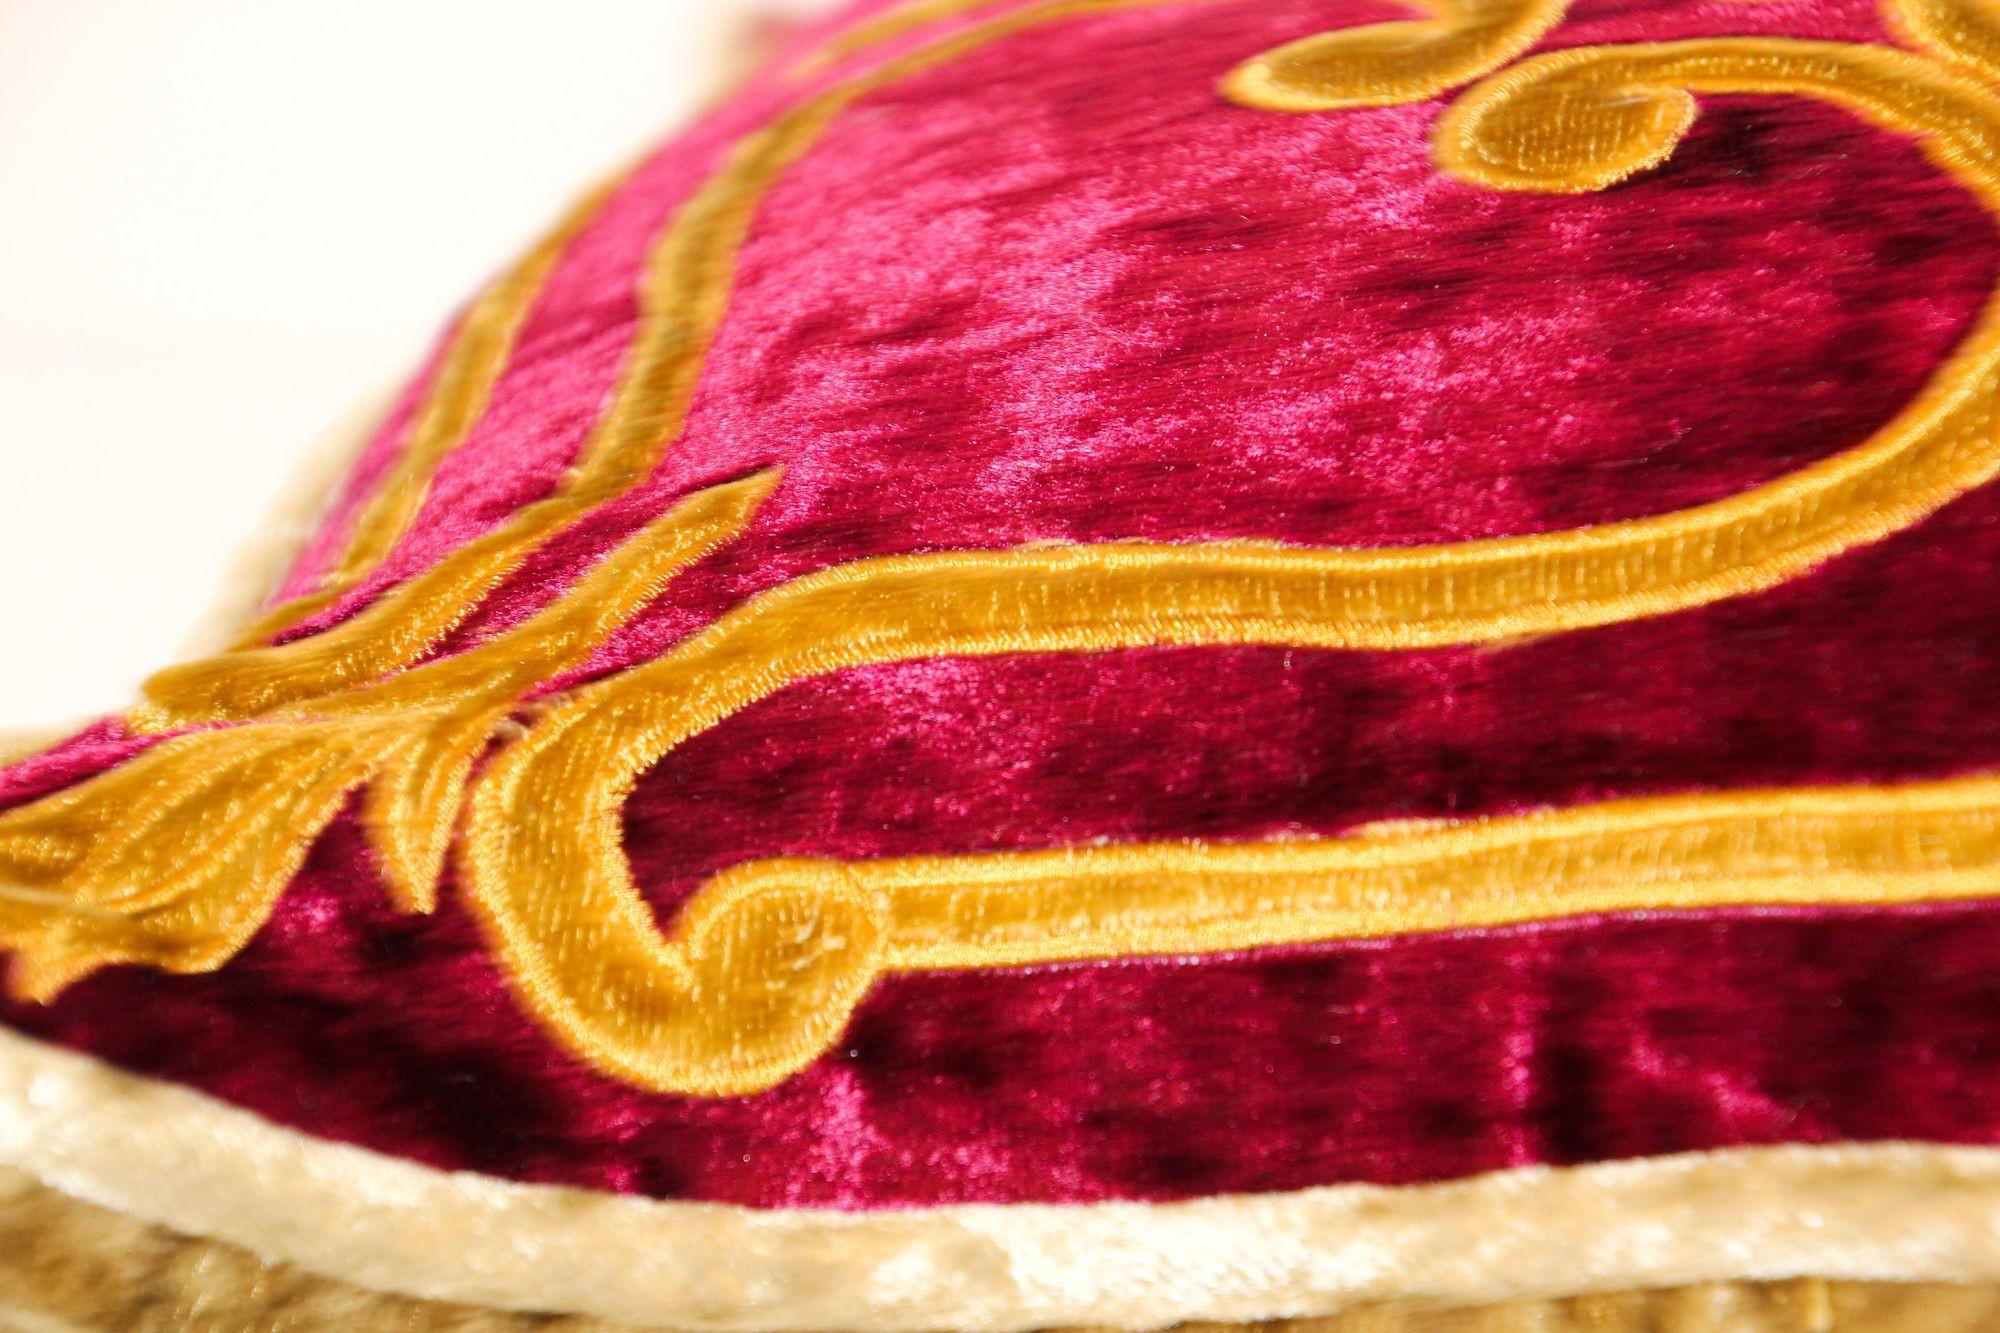 Venetian Baroque Red and Gold Velvet Pillows with Elaborate Applique Work a Pair For Sale 4